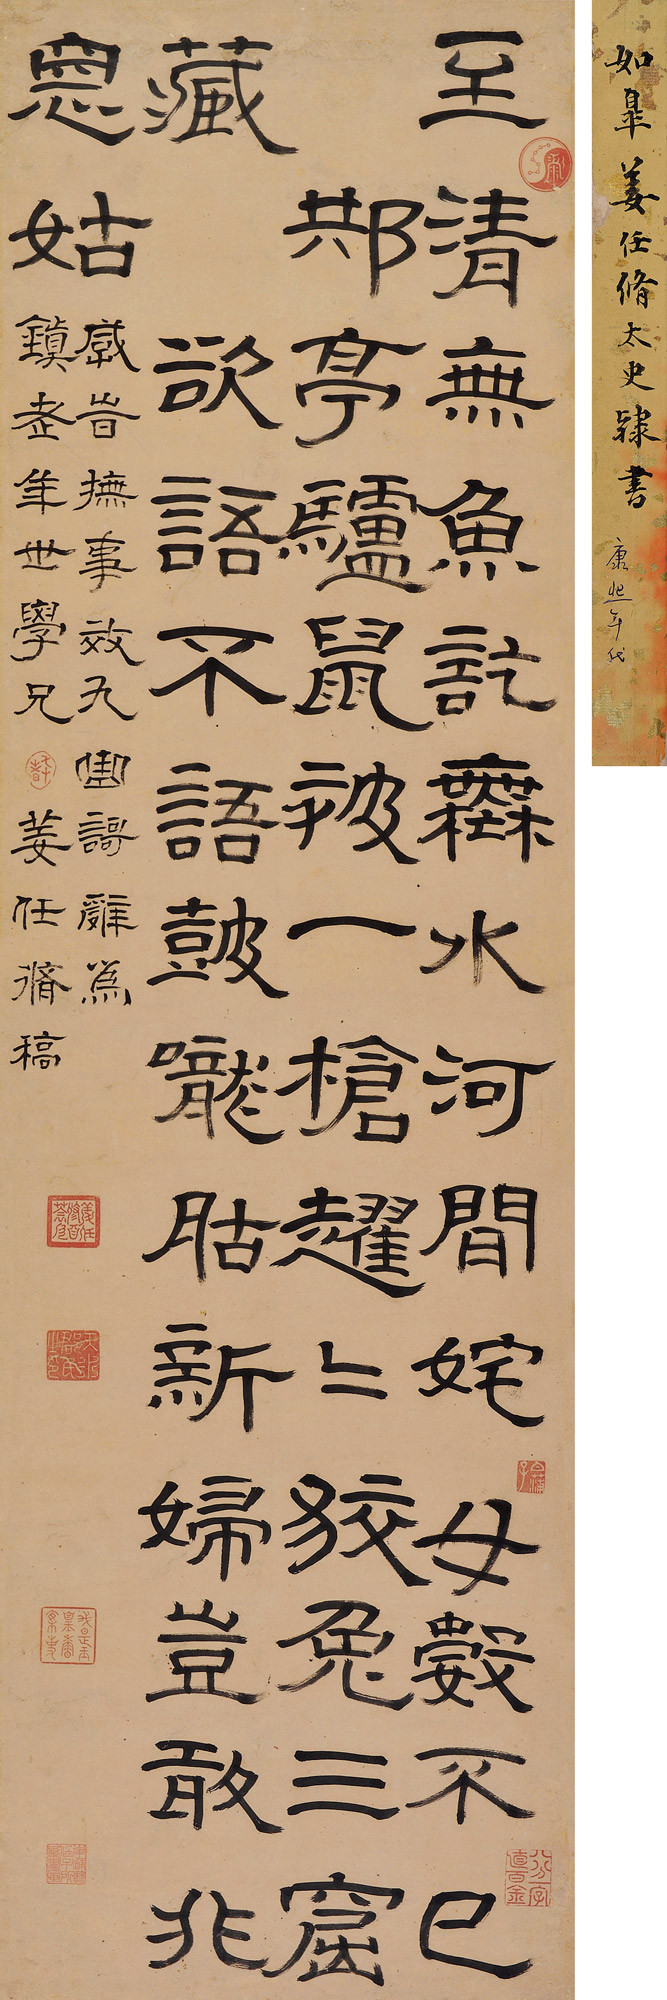 CALLIGRAPHY IN OFFICIAL SCRIPT